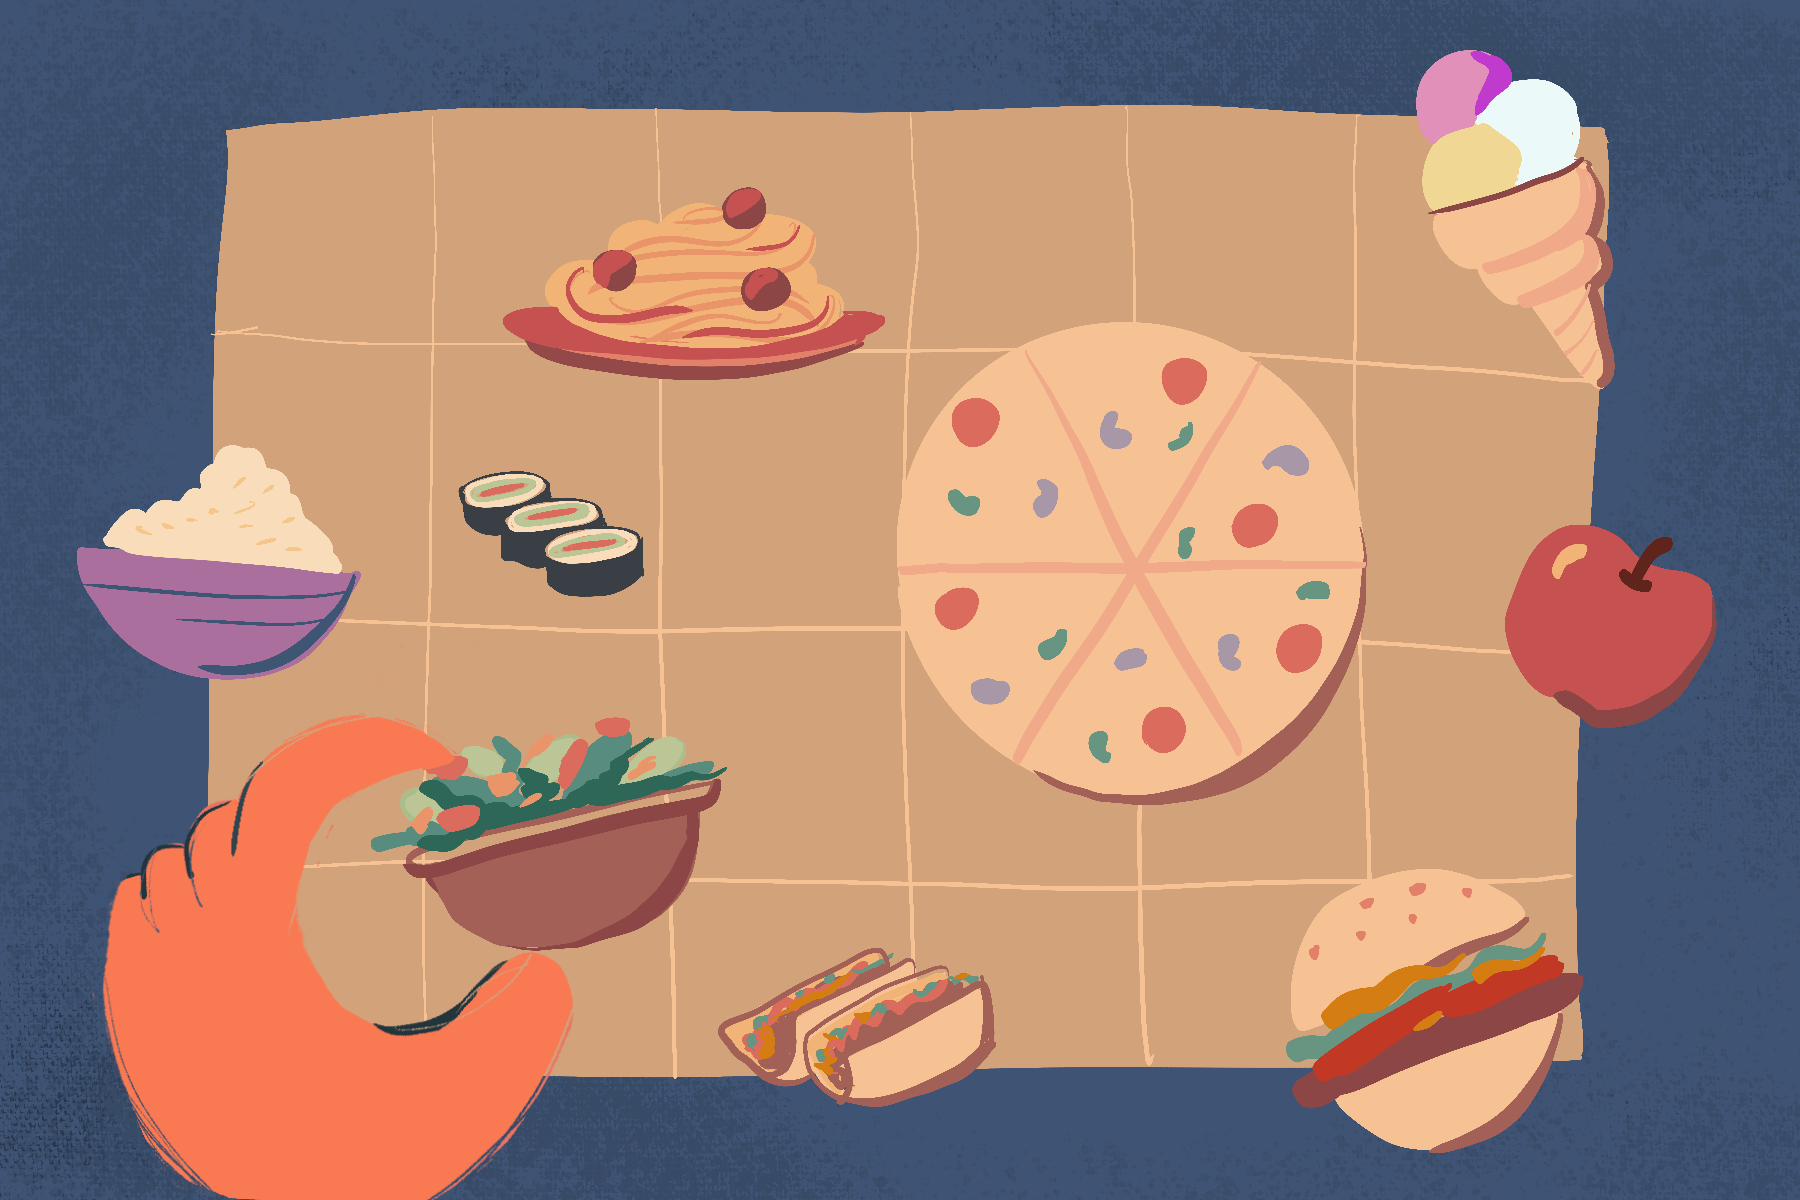 An illustration showing the Weavll grid with different food otems on it, such as a pizza, spaghetti and meat balls, ice cream, a bowl of rice, a bowl of salad, tacos, and a burger. There is a hand moving the salad bowl. 